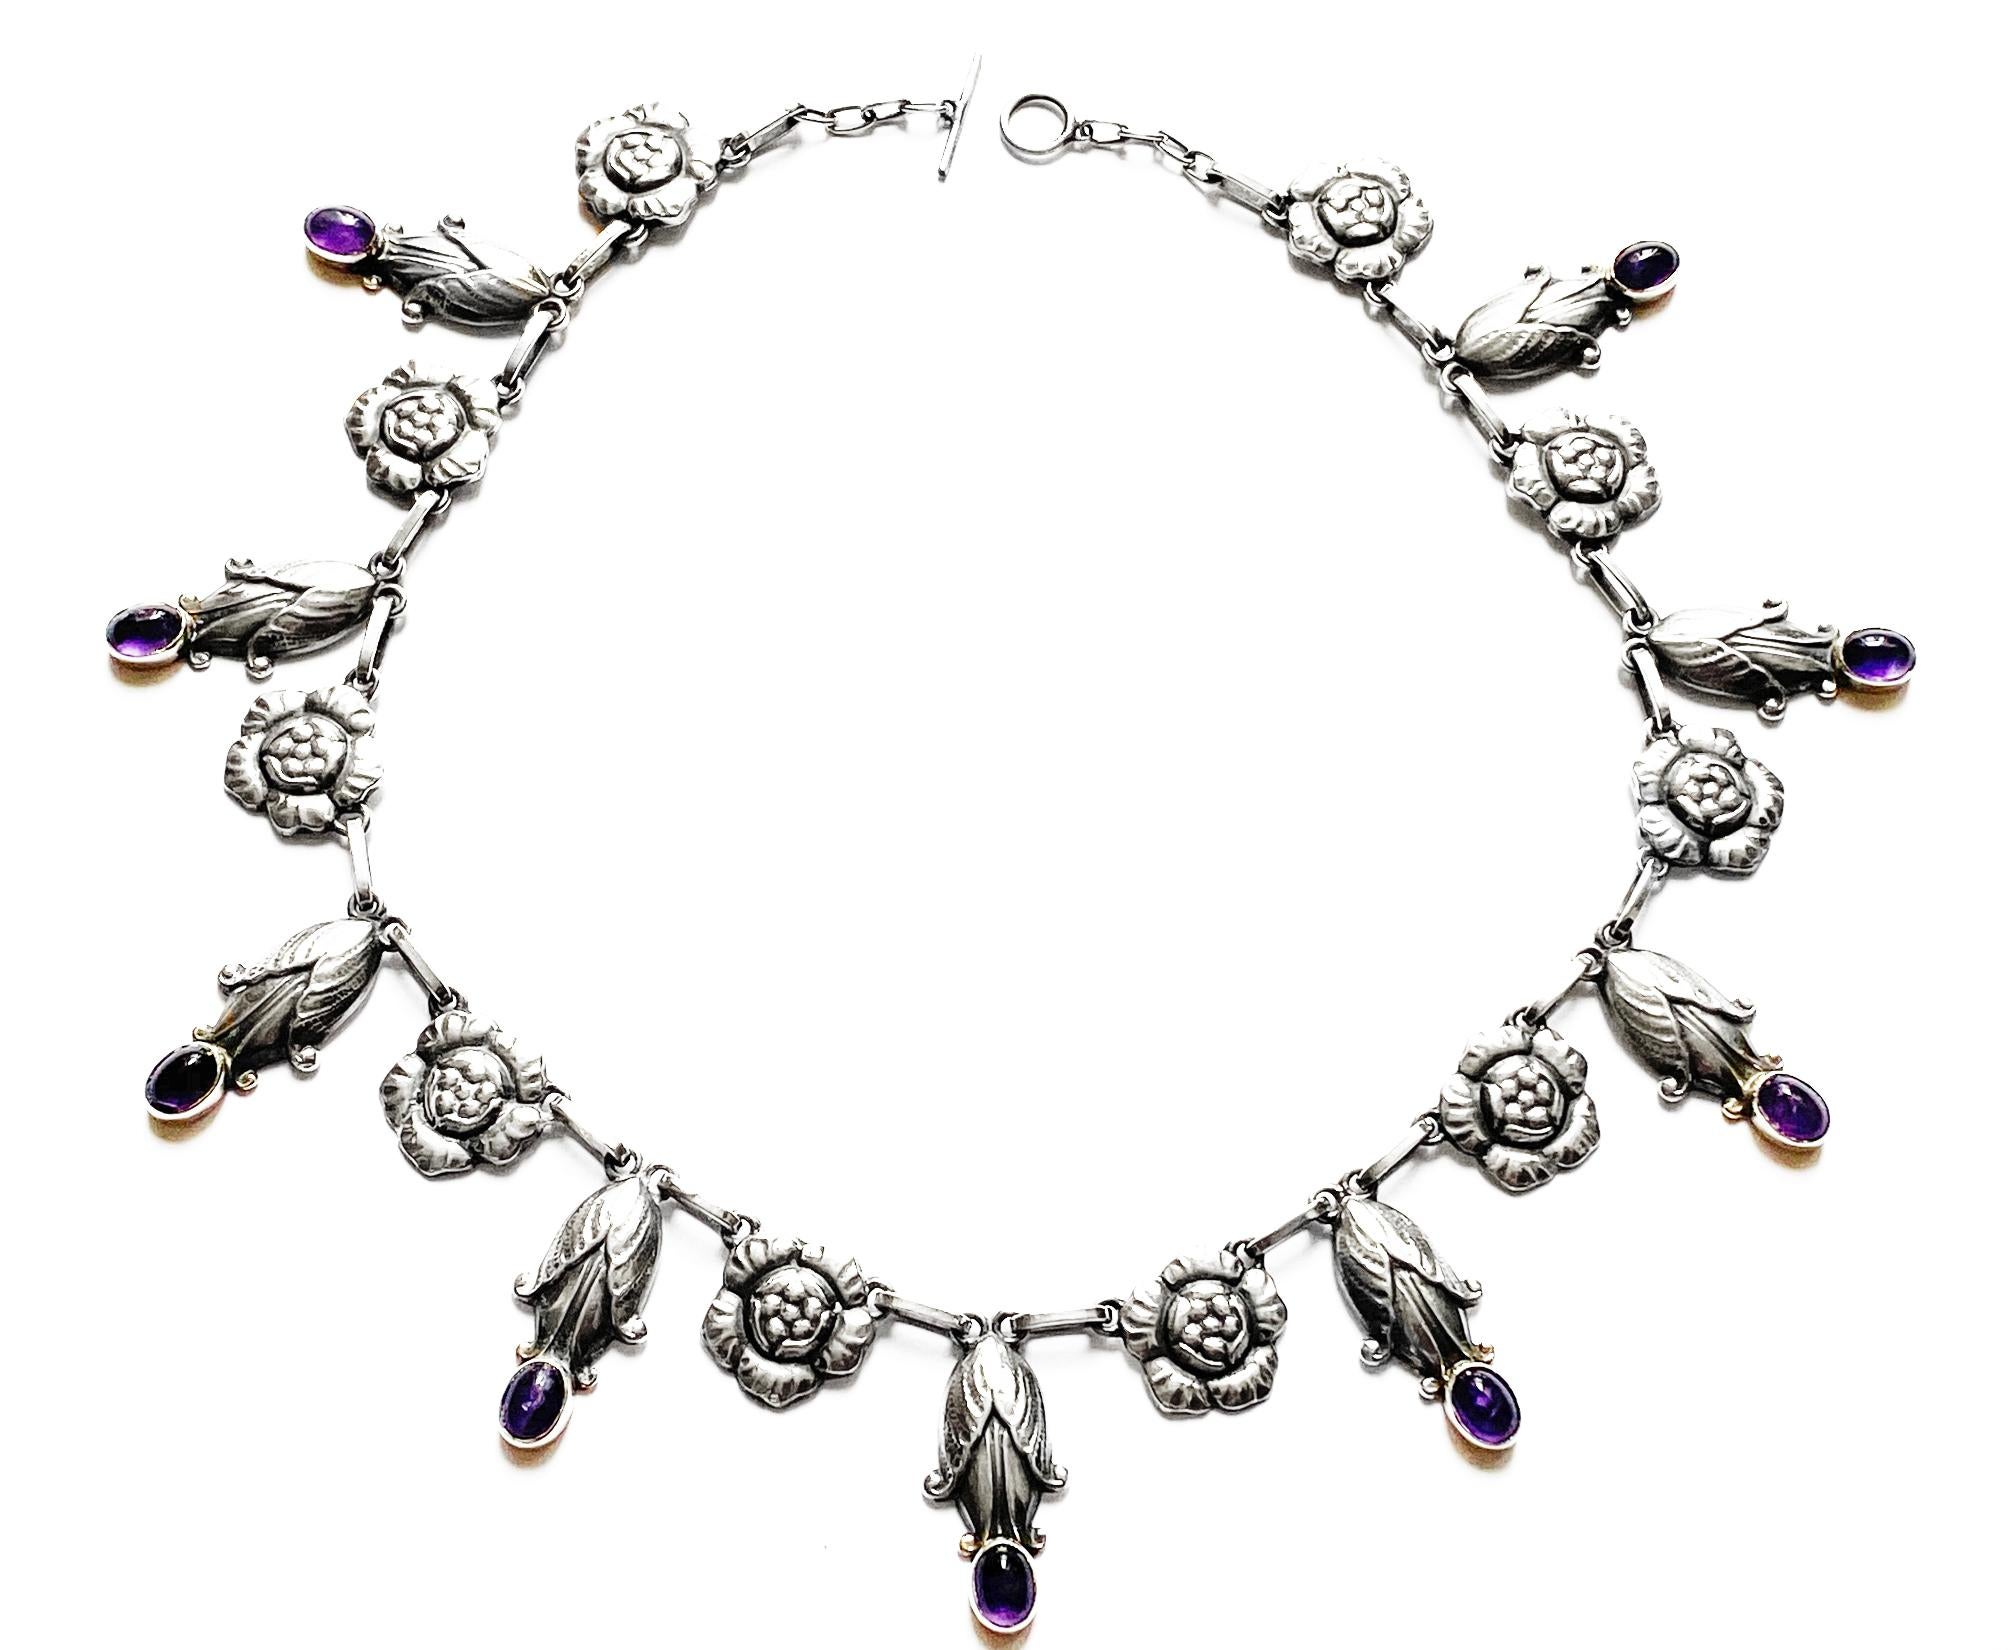 Georg Jensen rare design sterling amethyst necklace C.1930, design No. 6. The Necklace composed of rosette leaf and drop bud motifs. Length: 18.00 inches. Item Weight: 56.7 grams. Marks for Georg Jensen, GJ, 925 Sterling Denmark, 6.